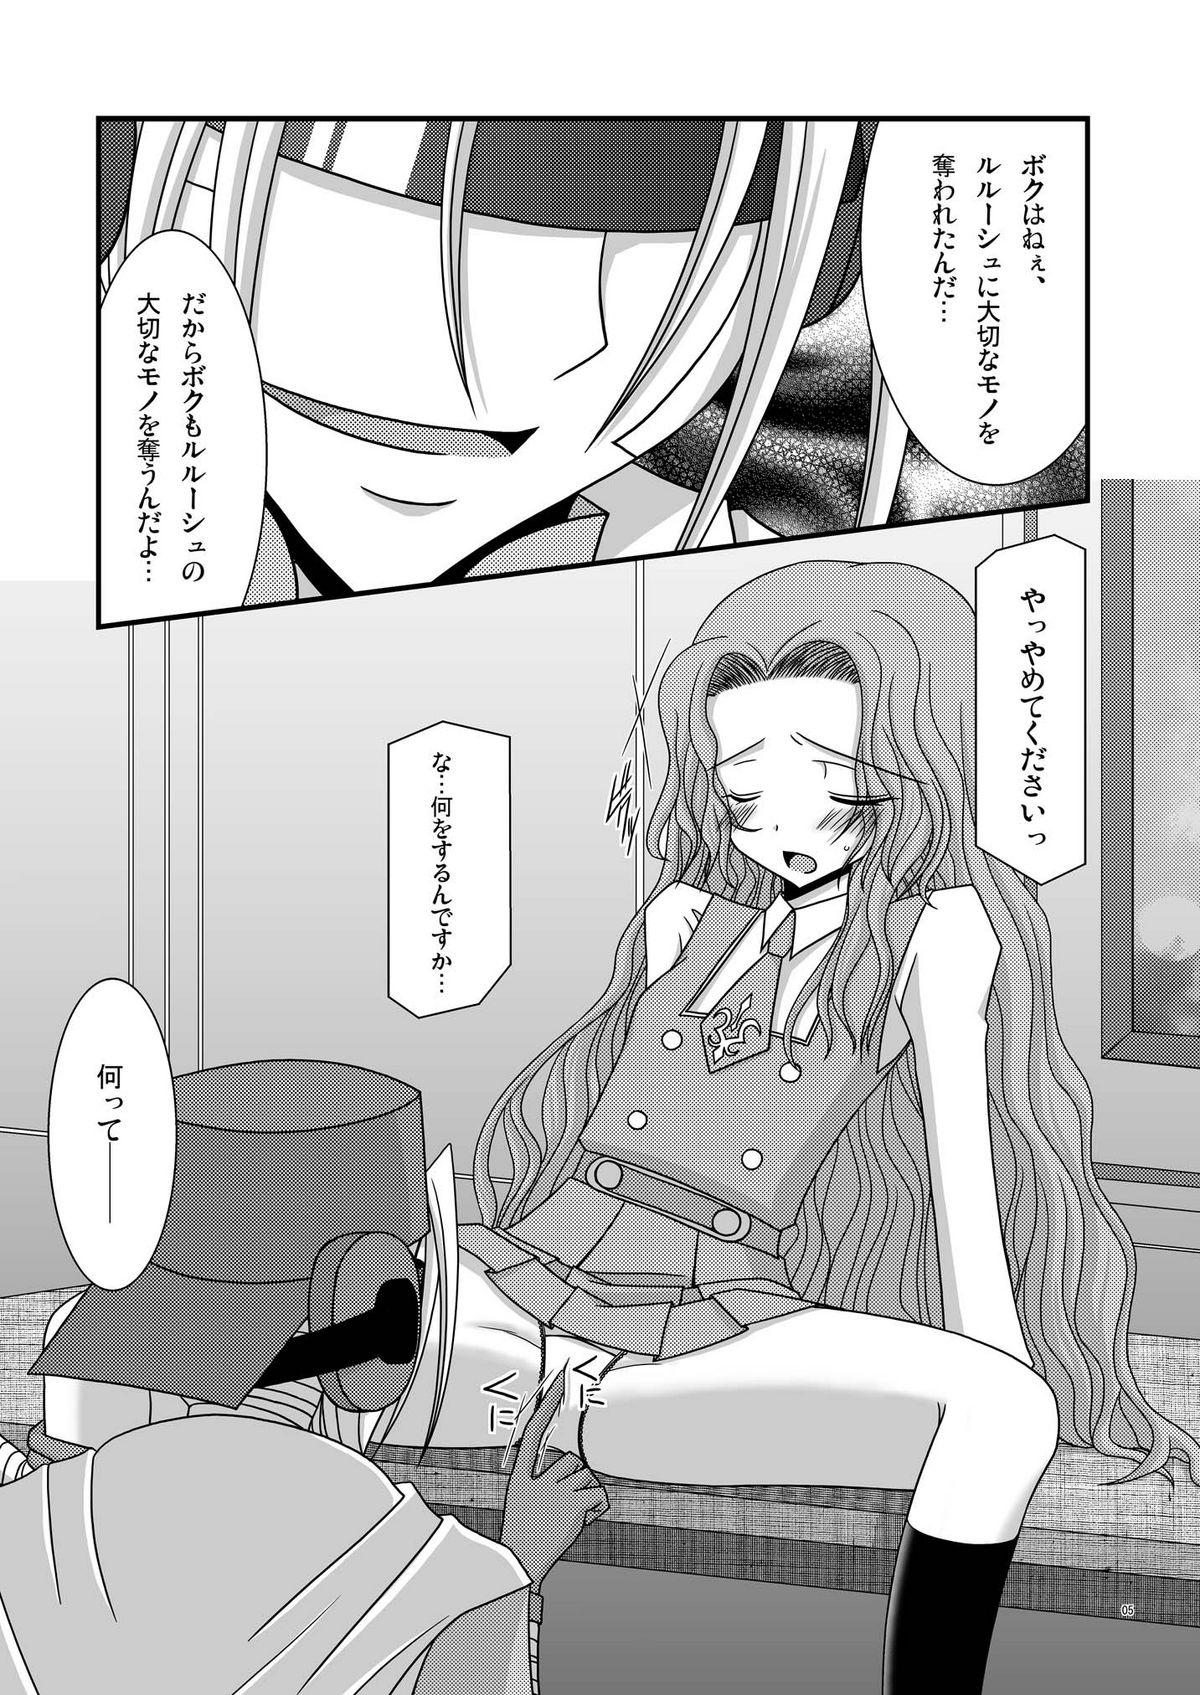 Tight Cunt Albtraum - Code geass Unshaved - Page 11